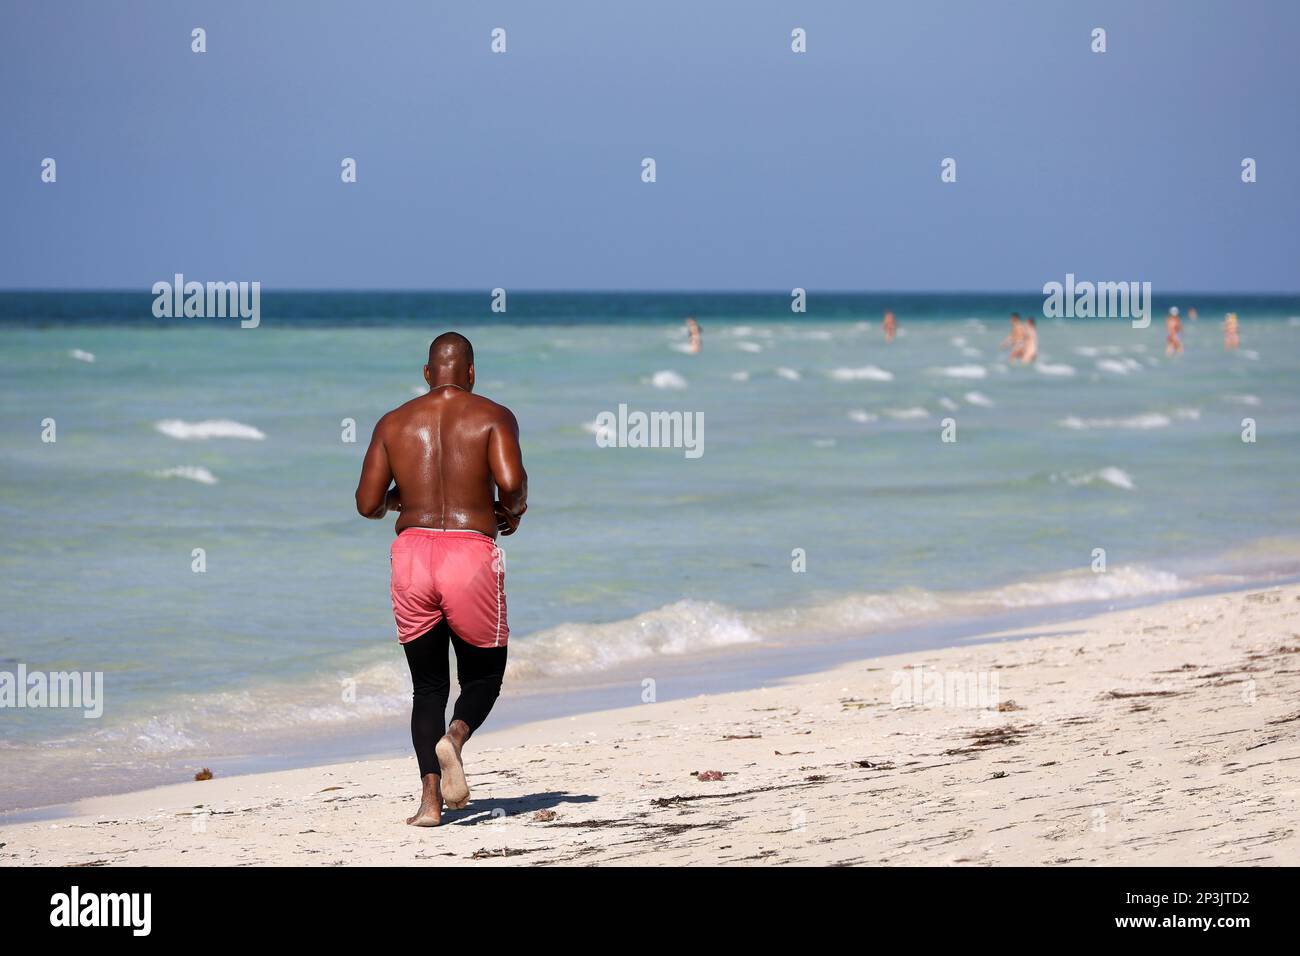 Barefoot black man running by the sand on sea waves background. Workout on a beach, healthy lifestyle Stock Photo